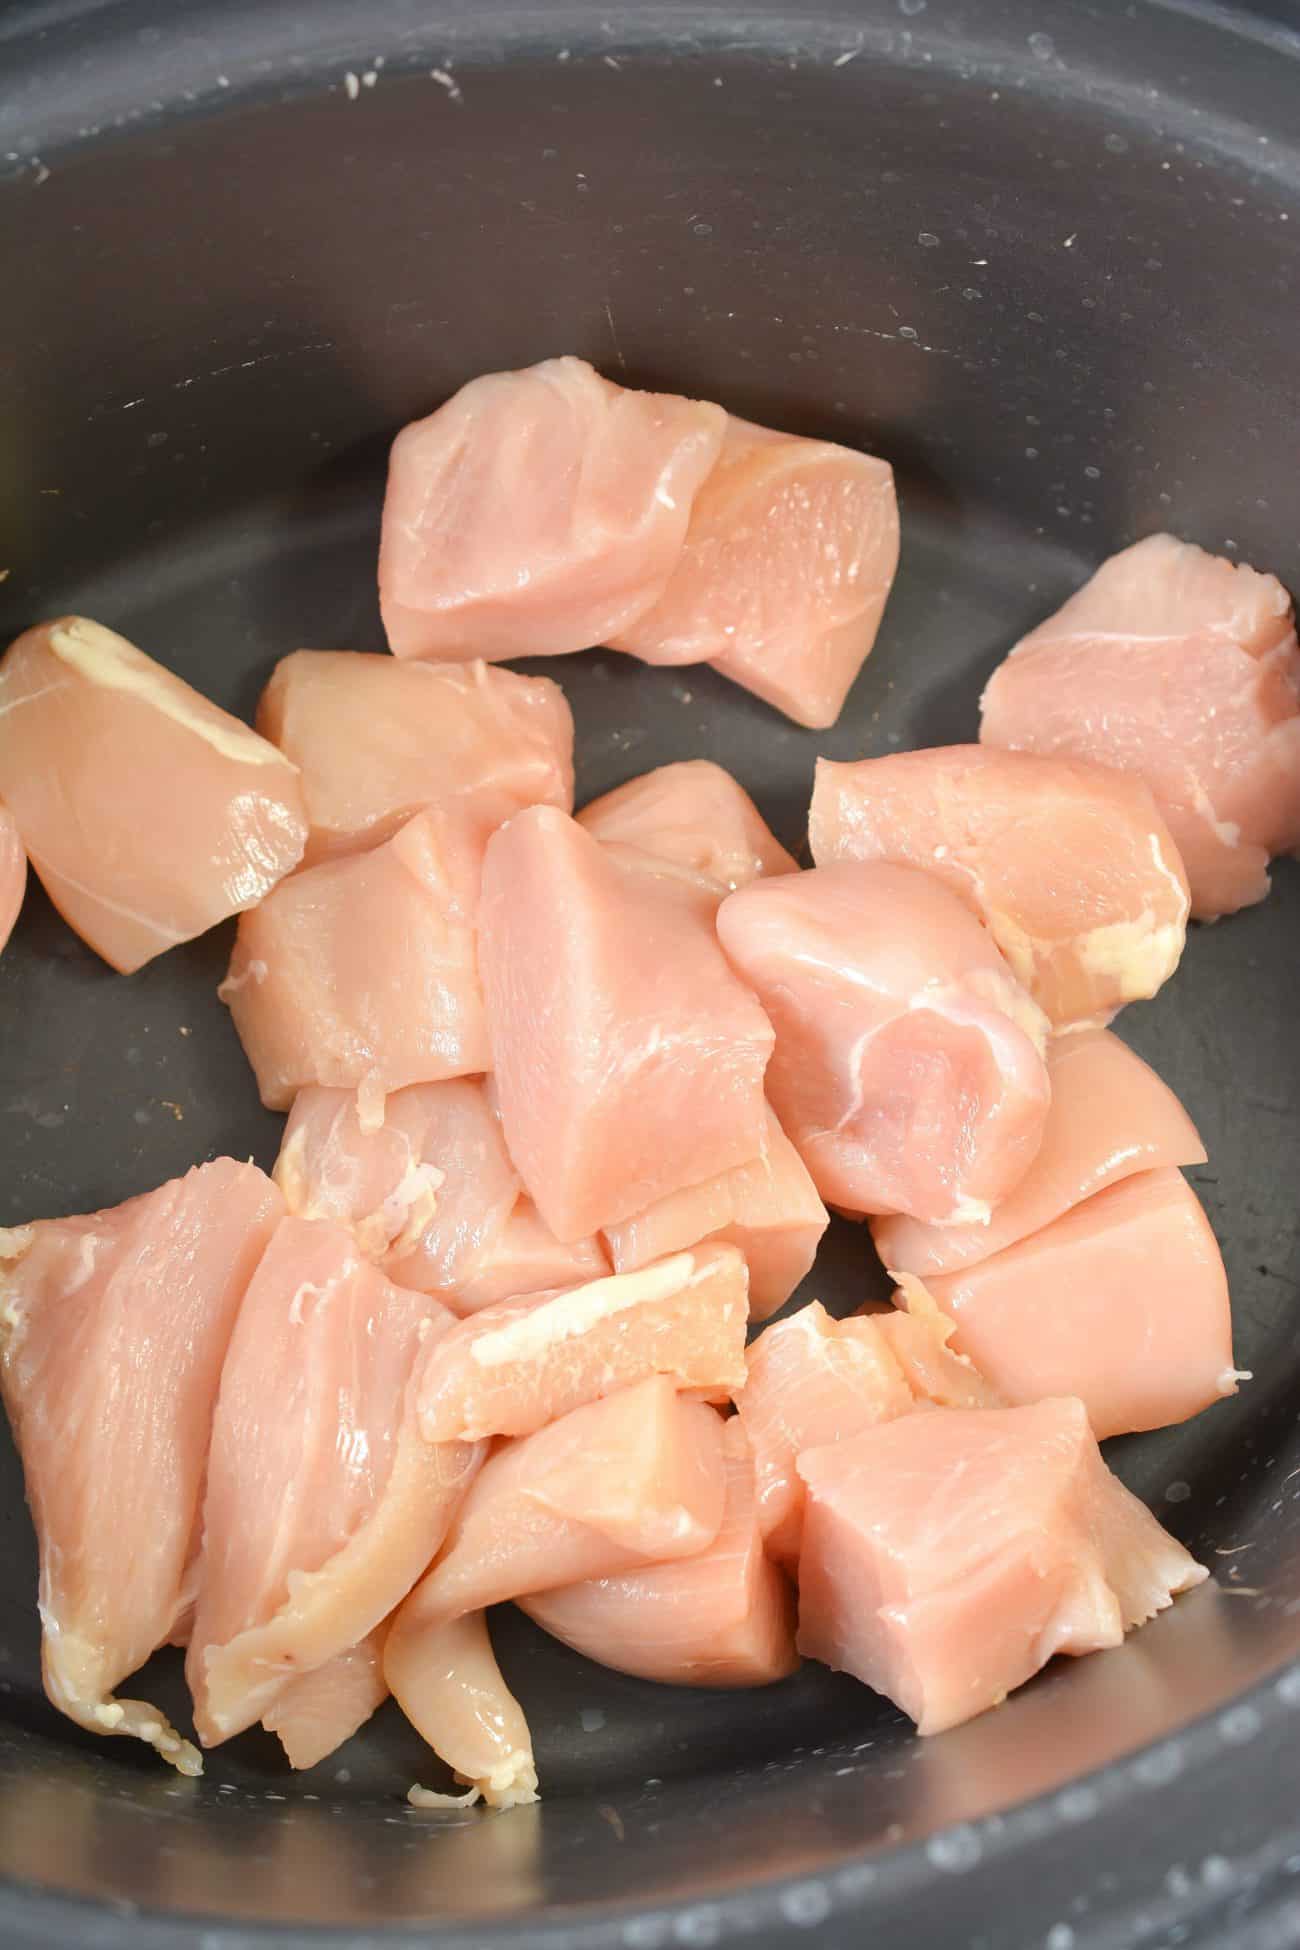 Layer 2 lb. Chicken breasts cut into pieces to the bottom of the crockpot.